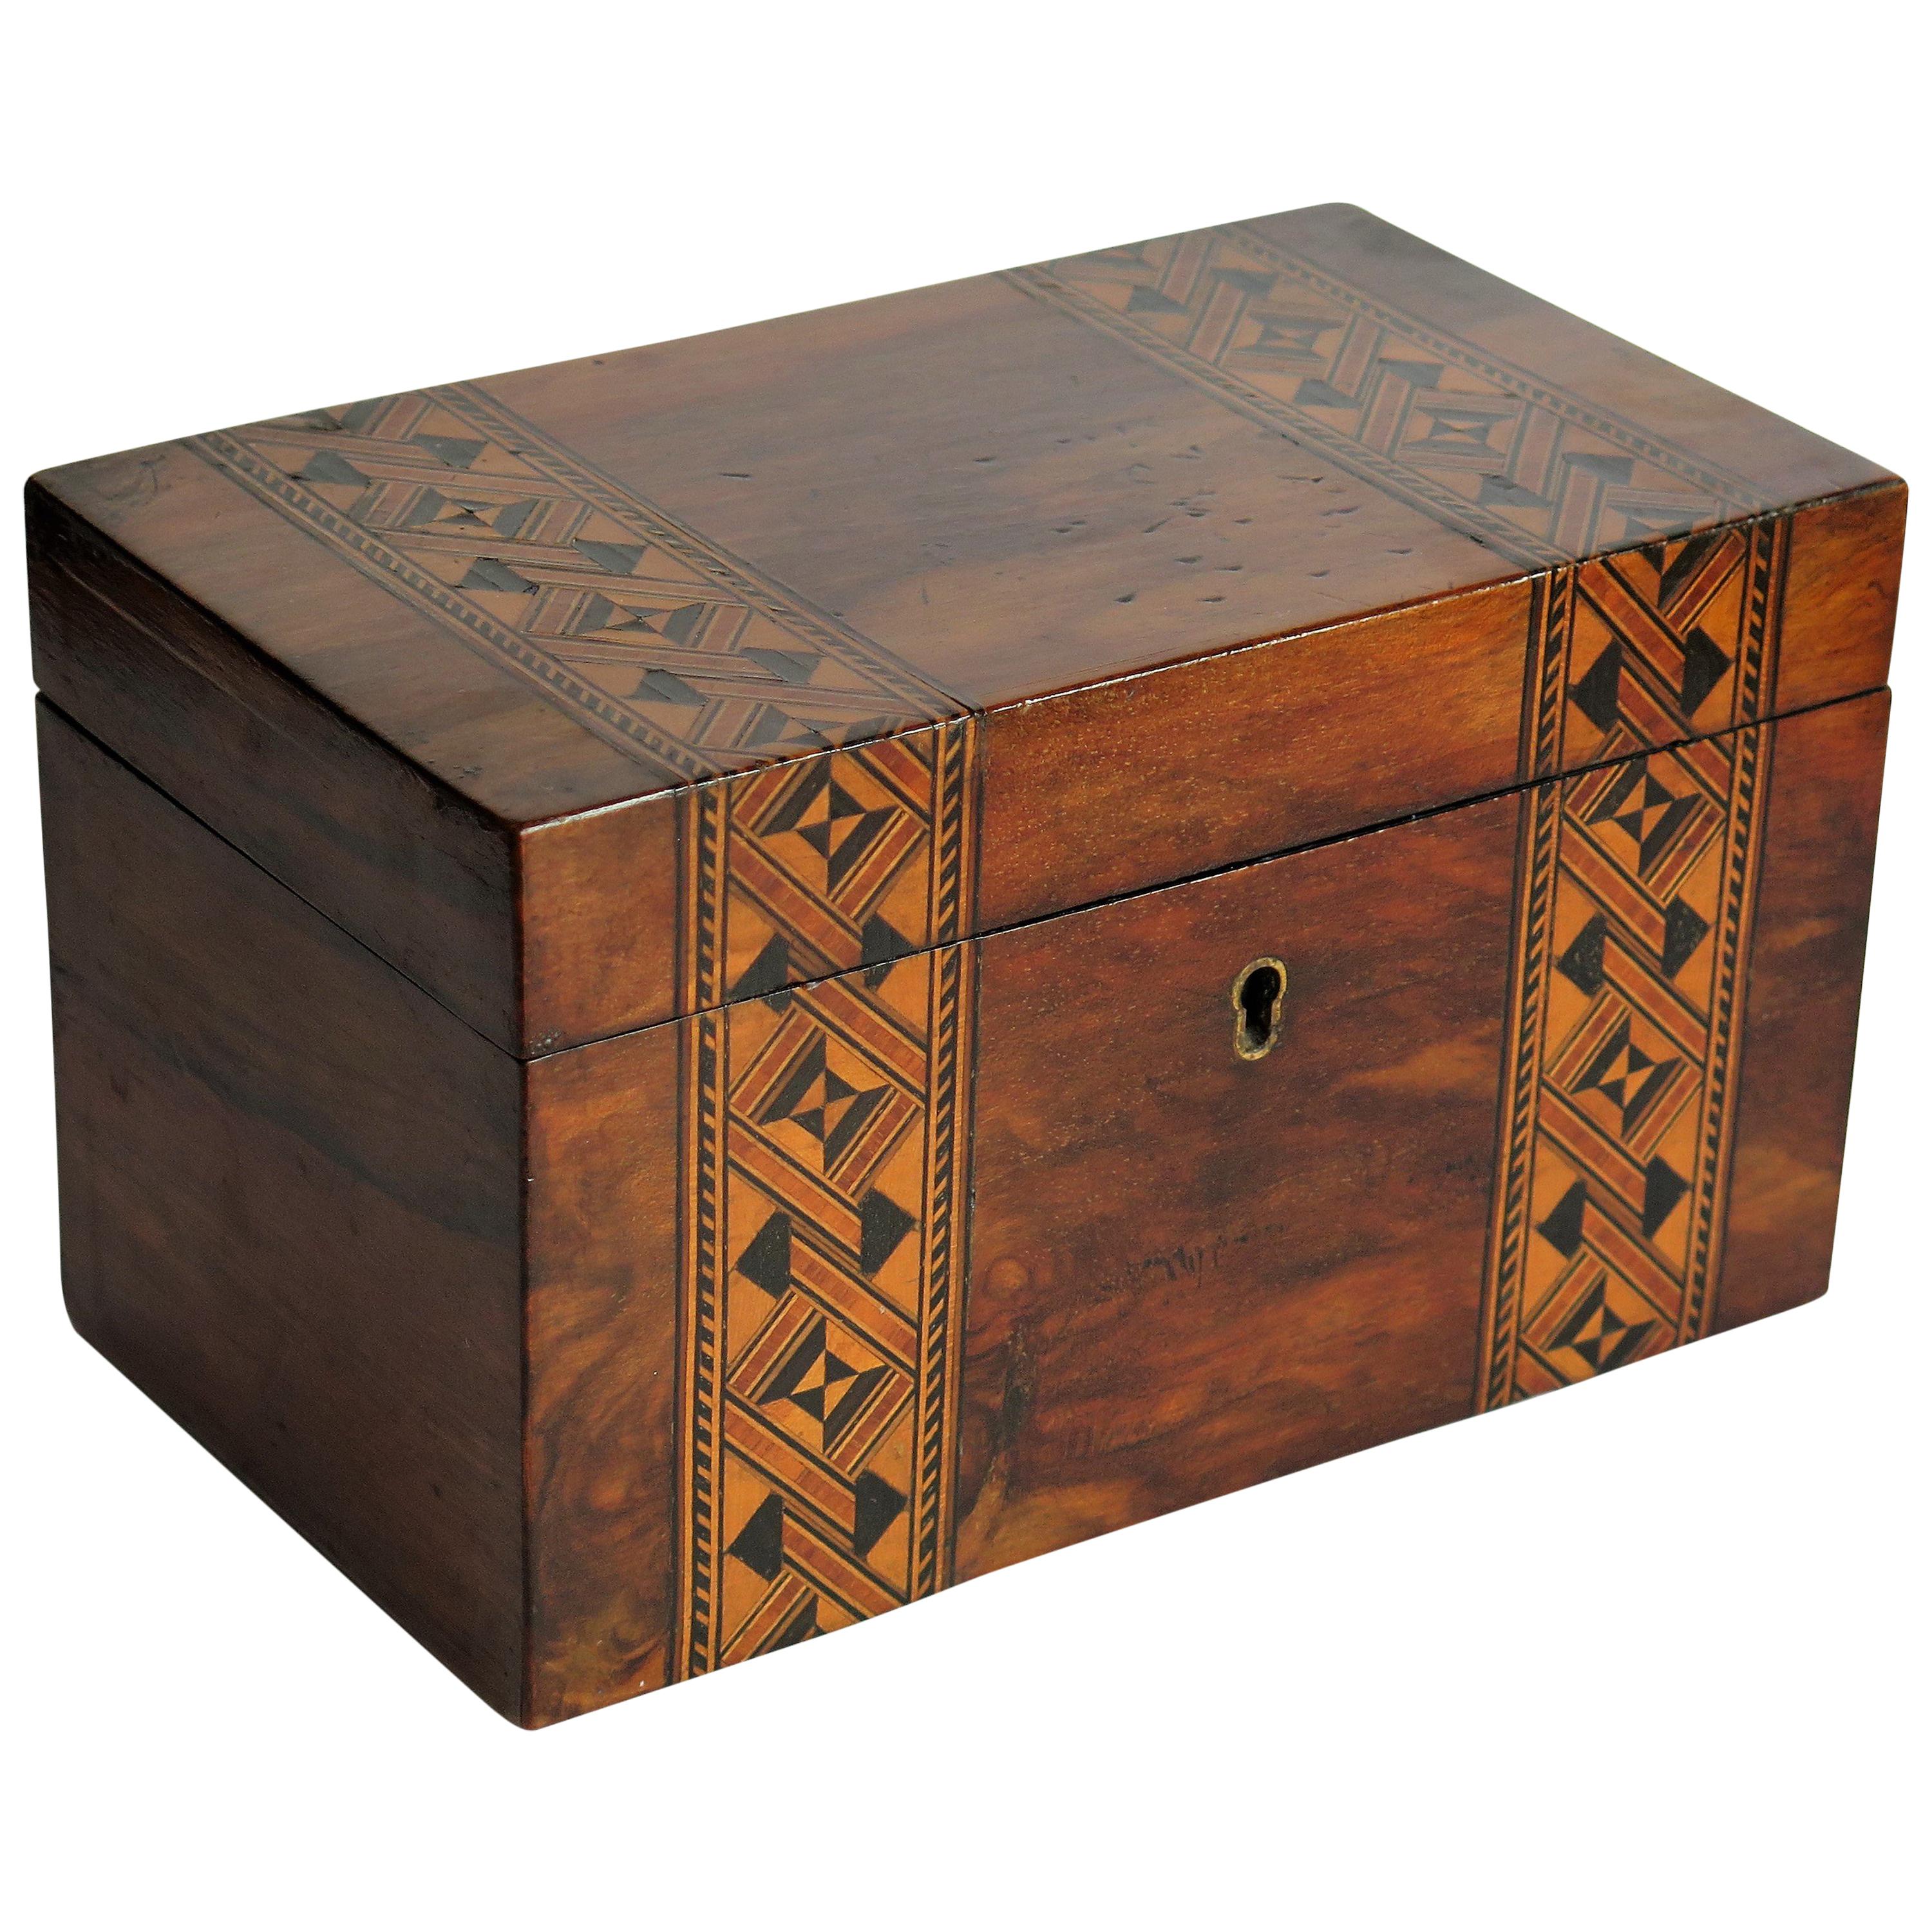 Mid-19th Century Lidded Box Walnut with Parquetry Mosaic Inlay, Mid Victorian